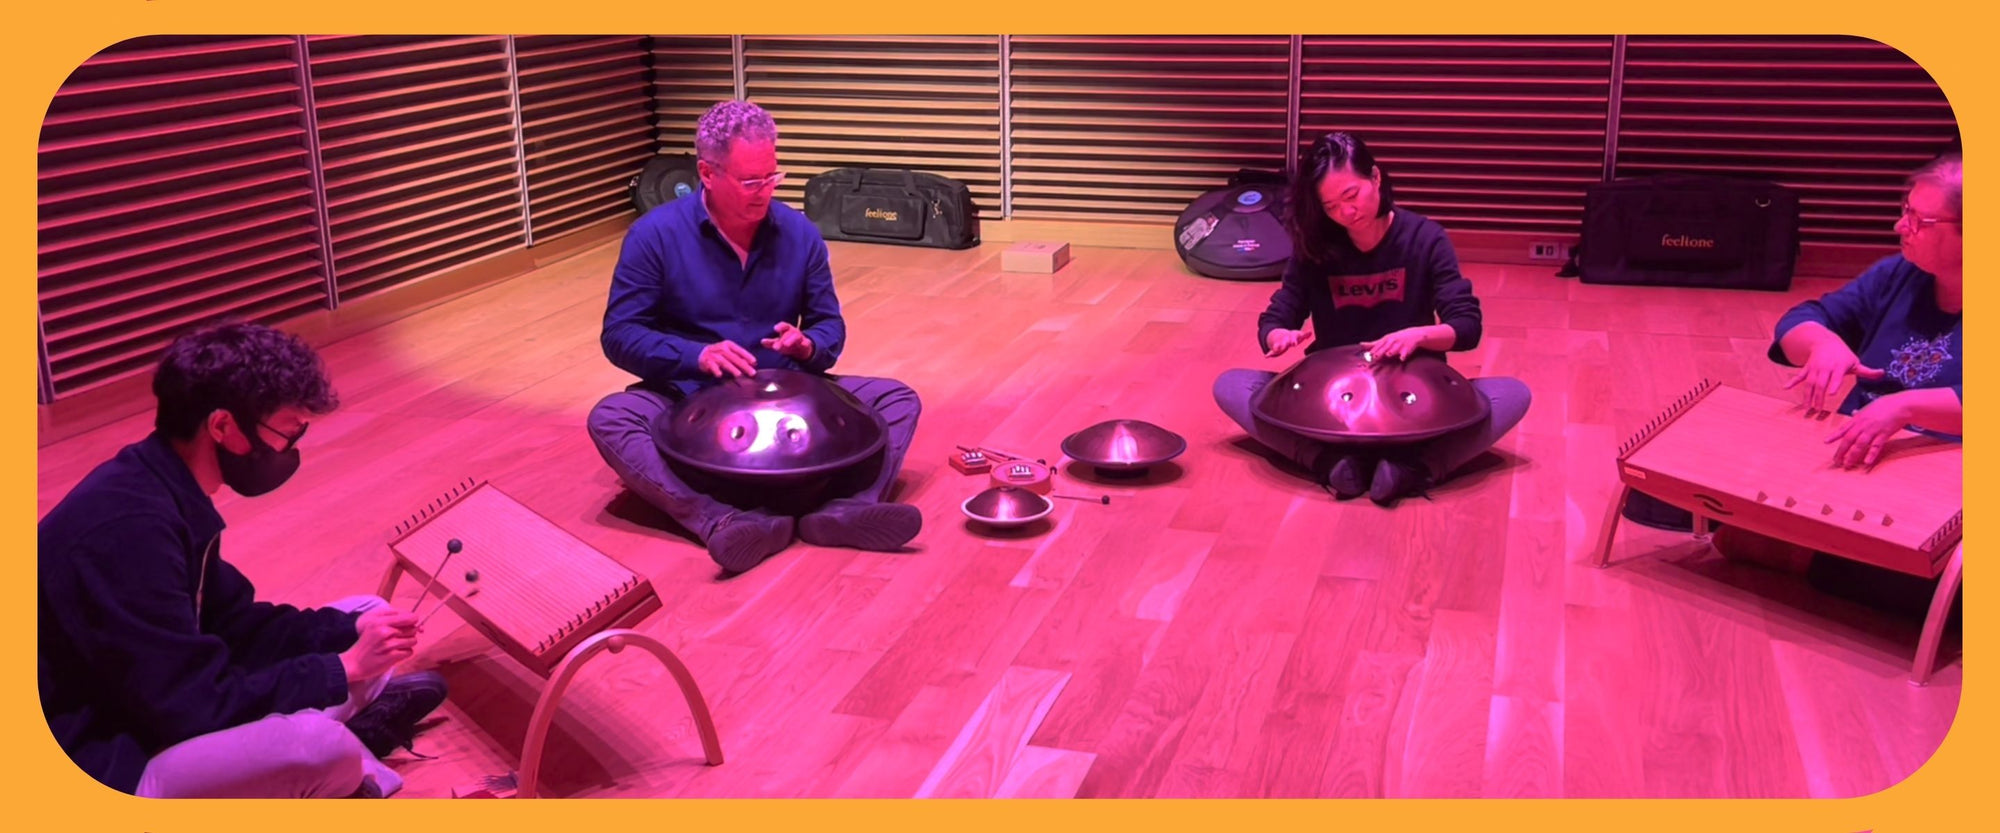 San Francisco conservatory students playing feeltone monochords and Metal Sound space drums | weplaywelltogether